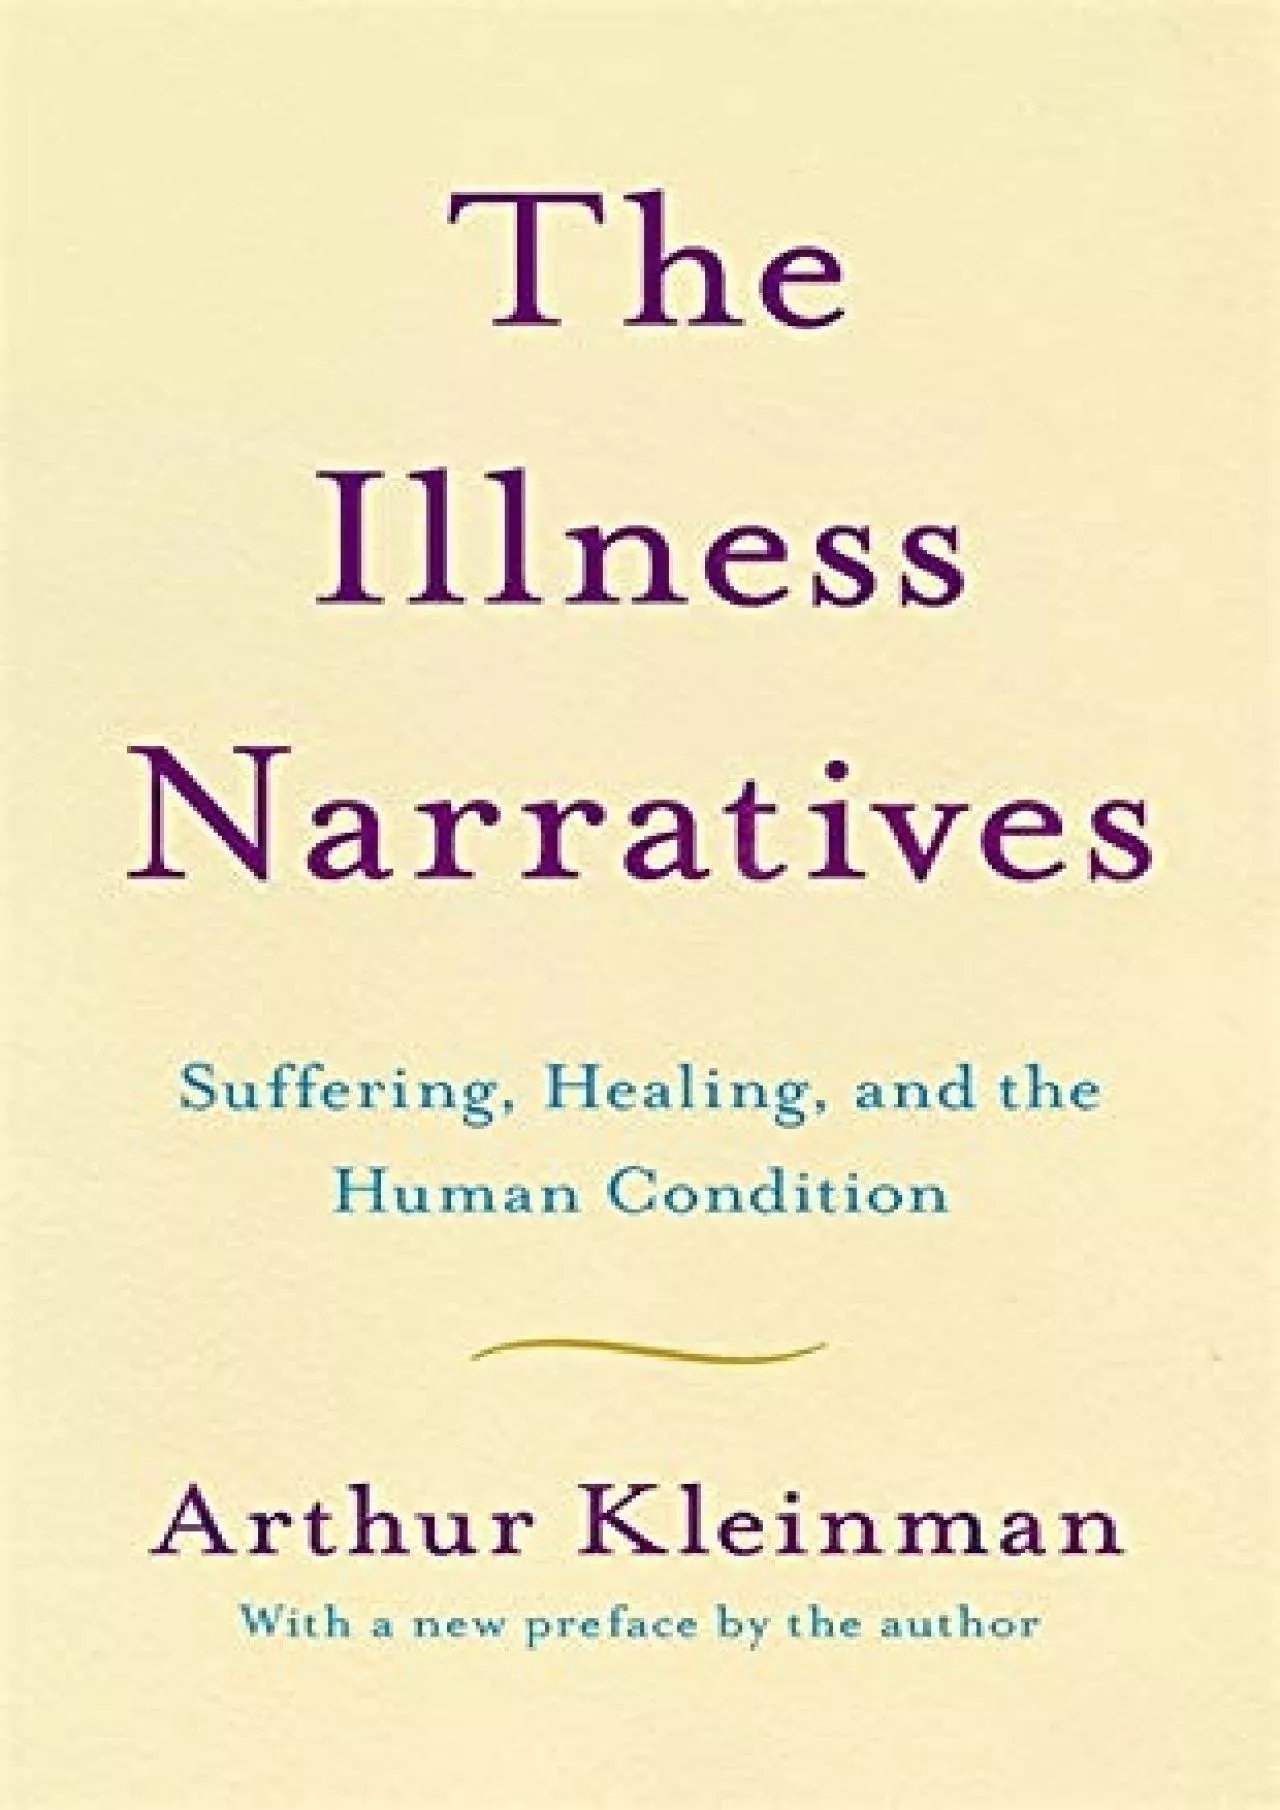 (EBOOK)-The Illness Narratives: Suffering, Healing, And The Human Condition